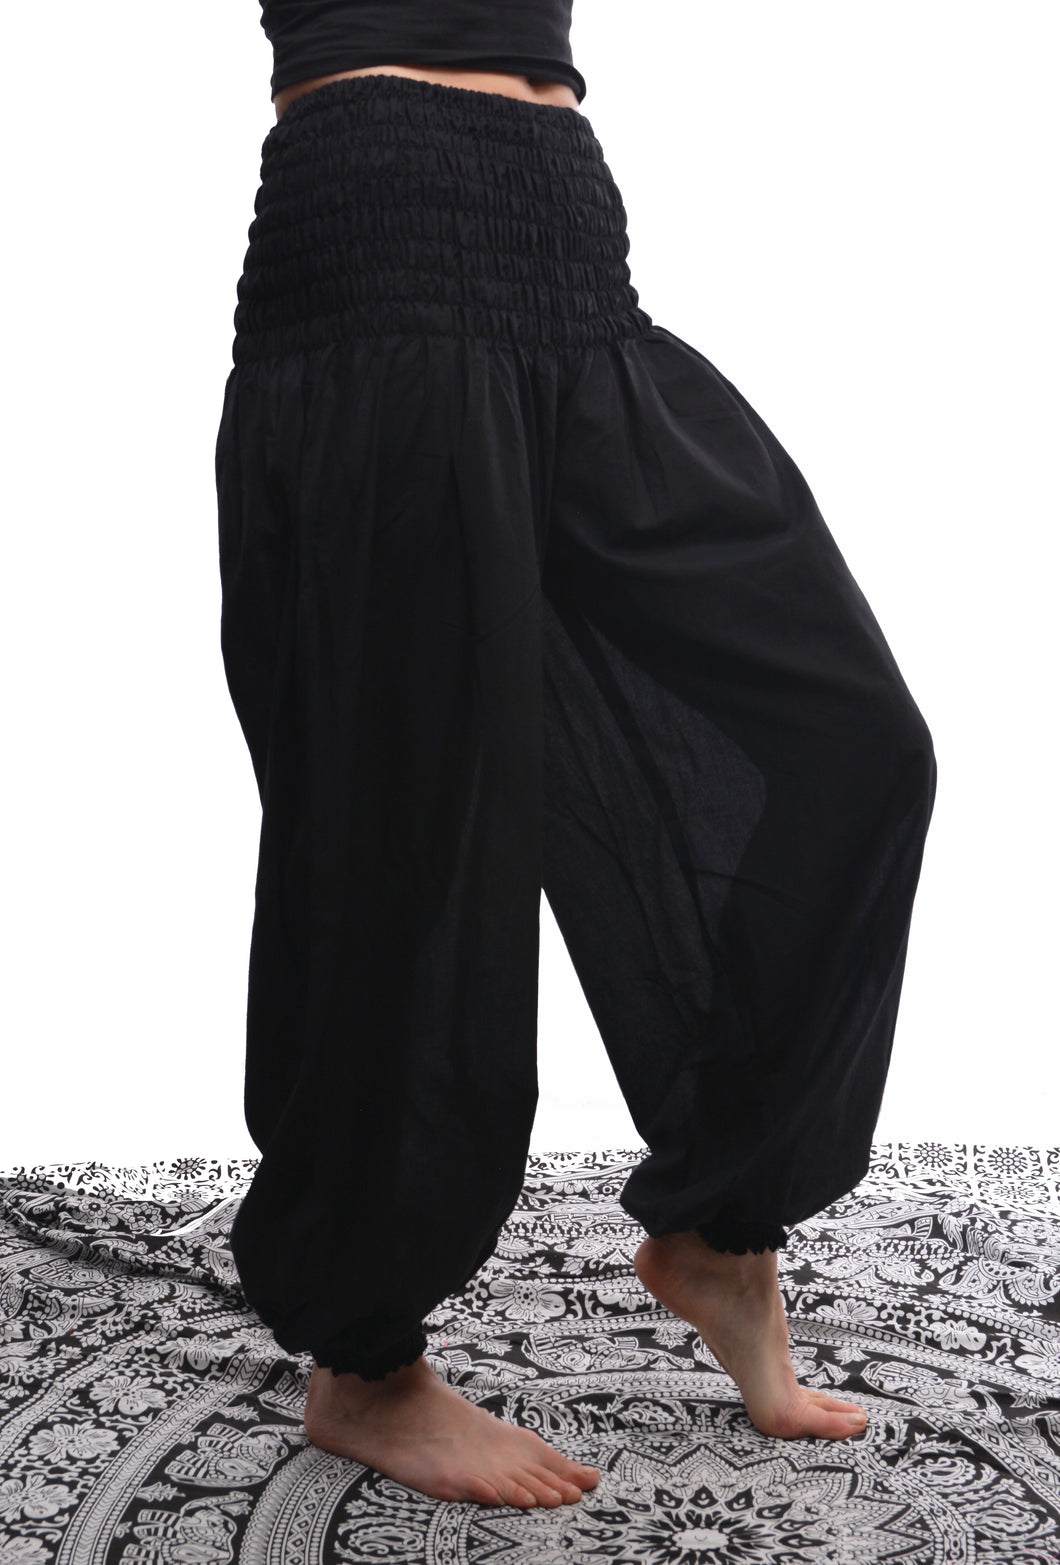 Buy online now from Emma's Emporium women clothing. Organic cotton genie harem trousers, fantastic unisex lightweight summer trousers for yoga, festivals, maternity